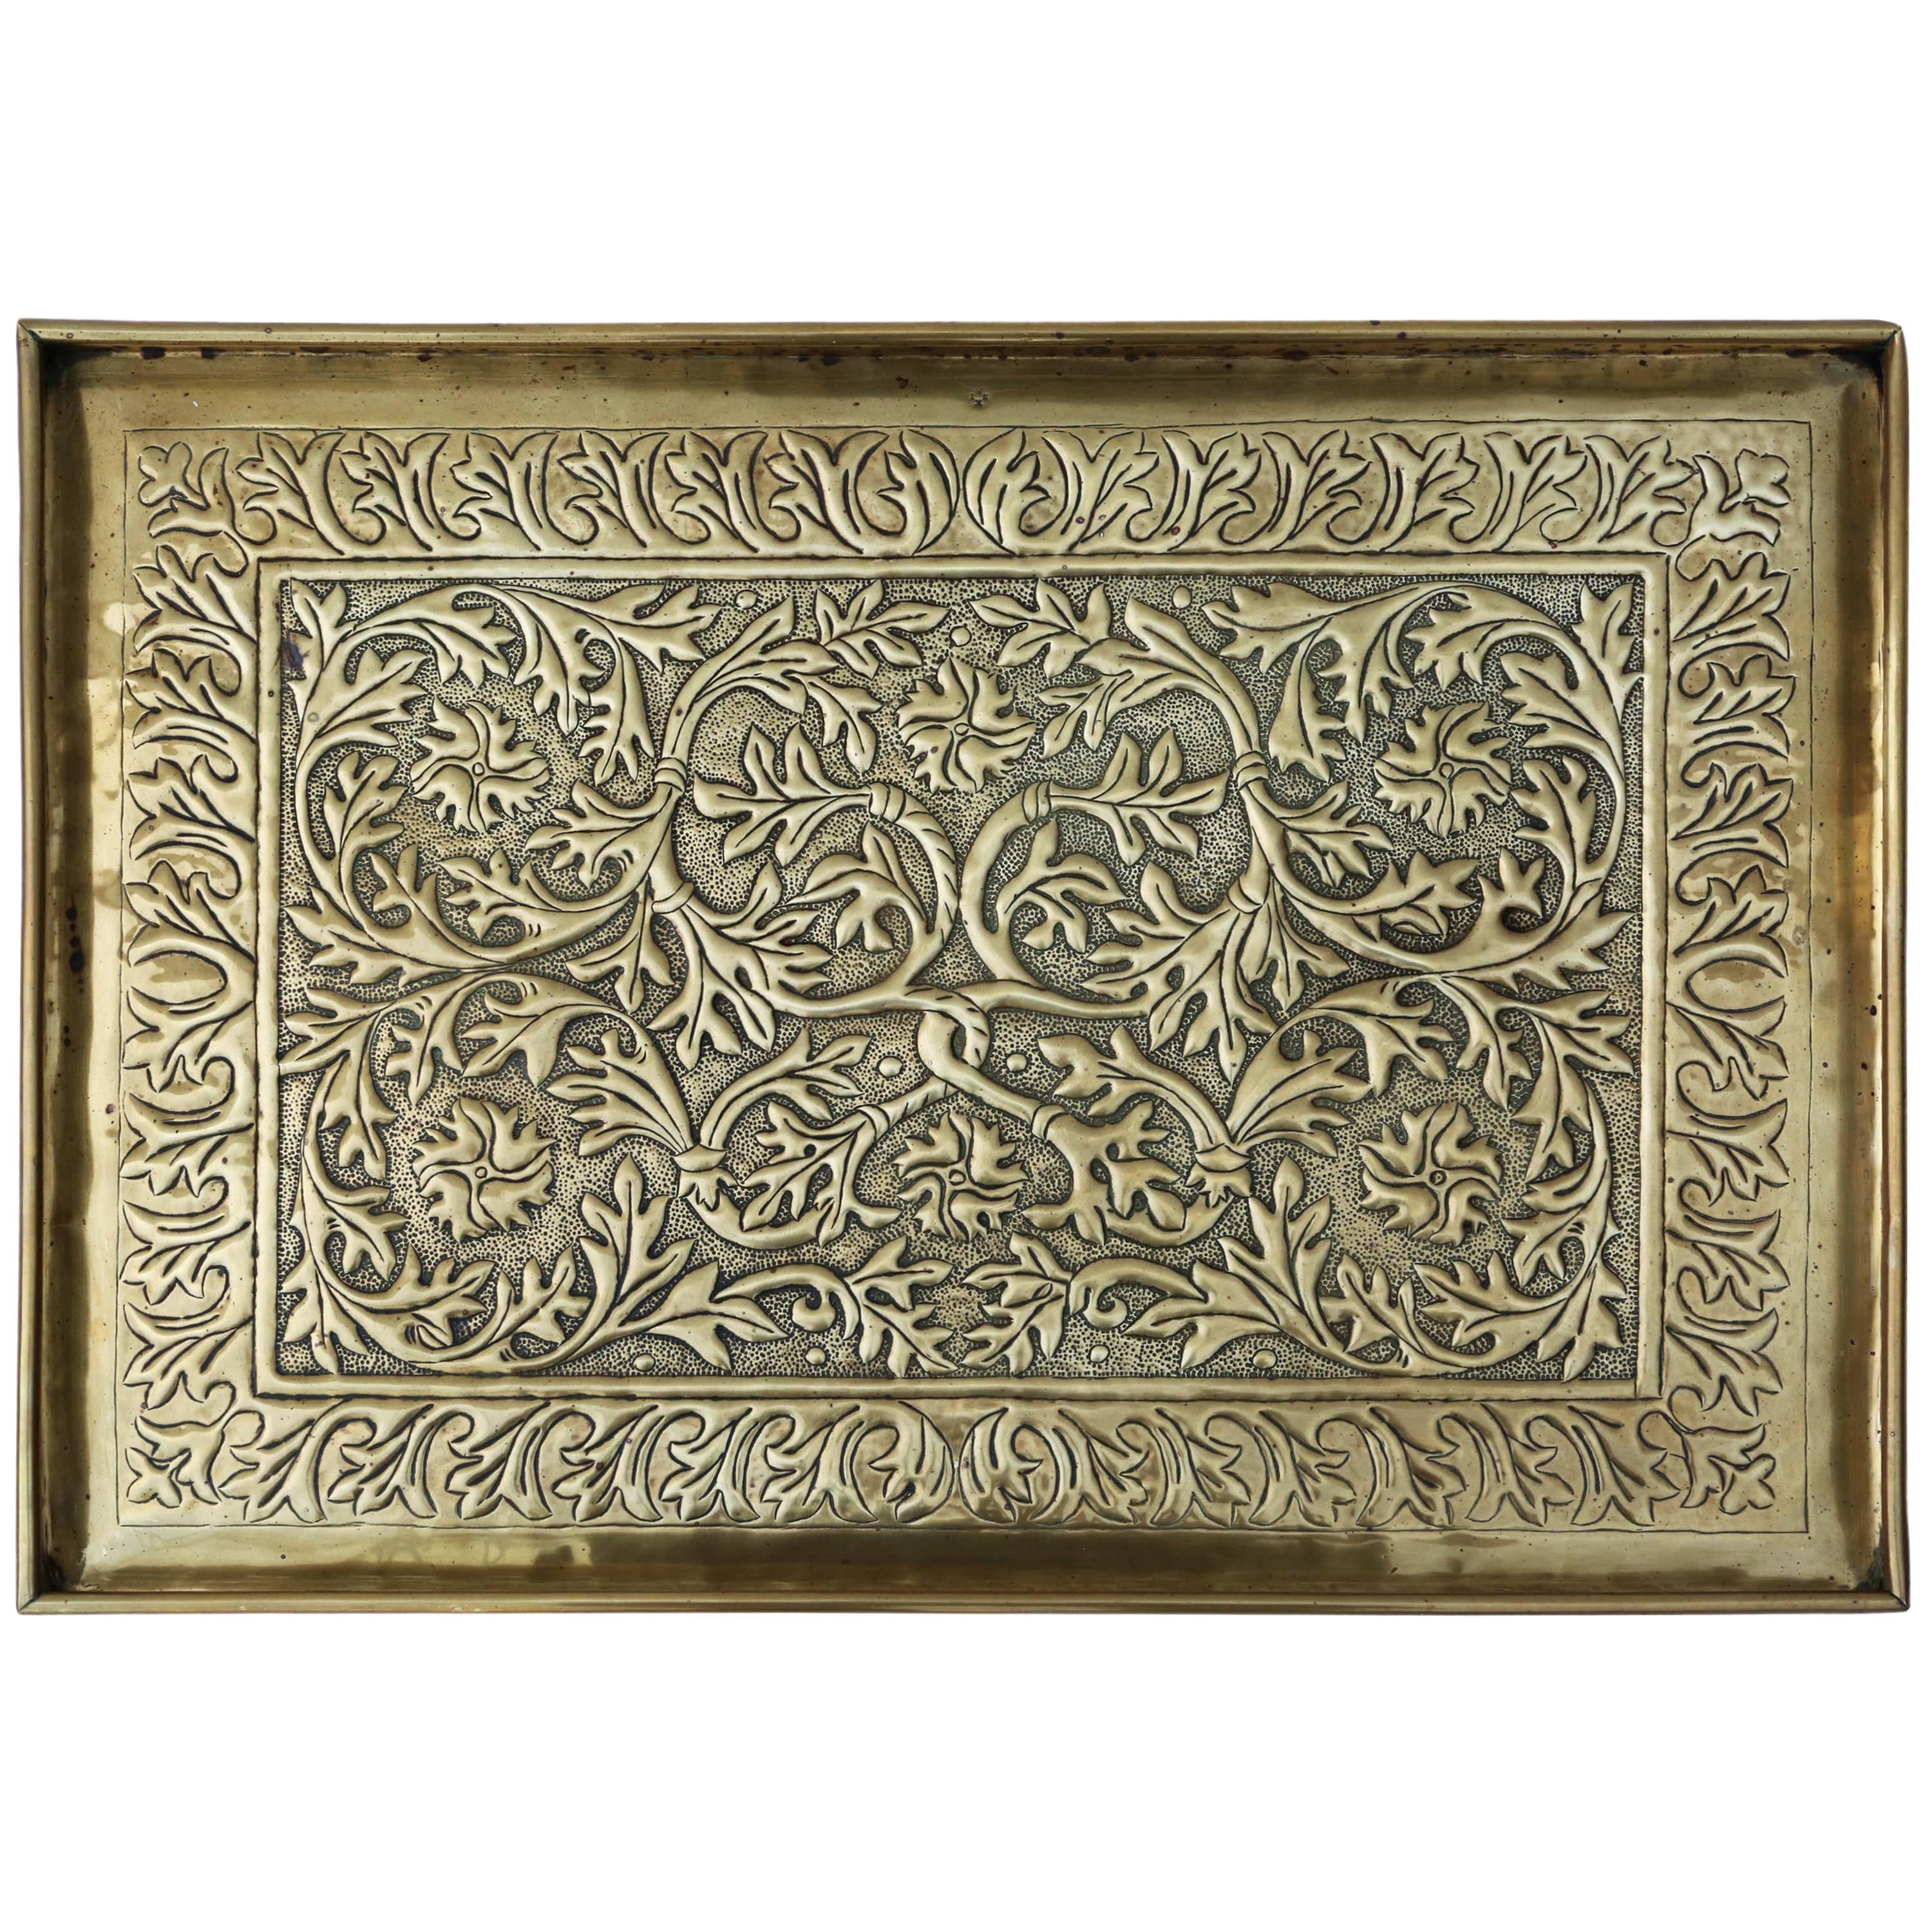 Antique Quality circa 1920 Keswick School of Industrial Art Brass Serving Tray For Sale